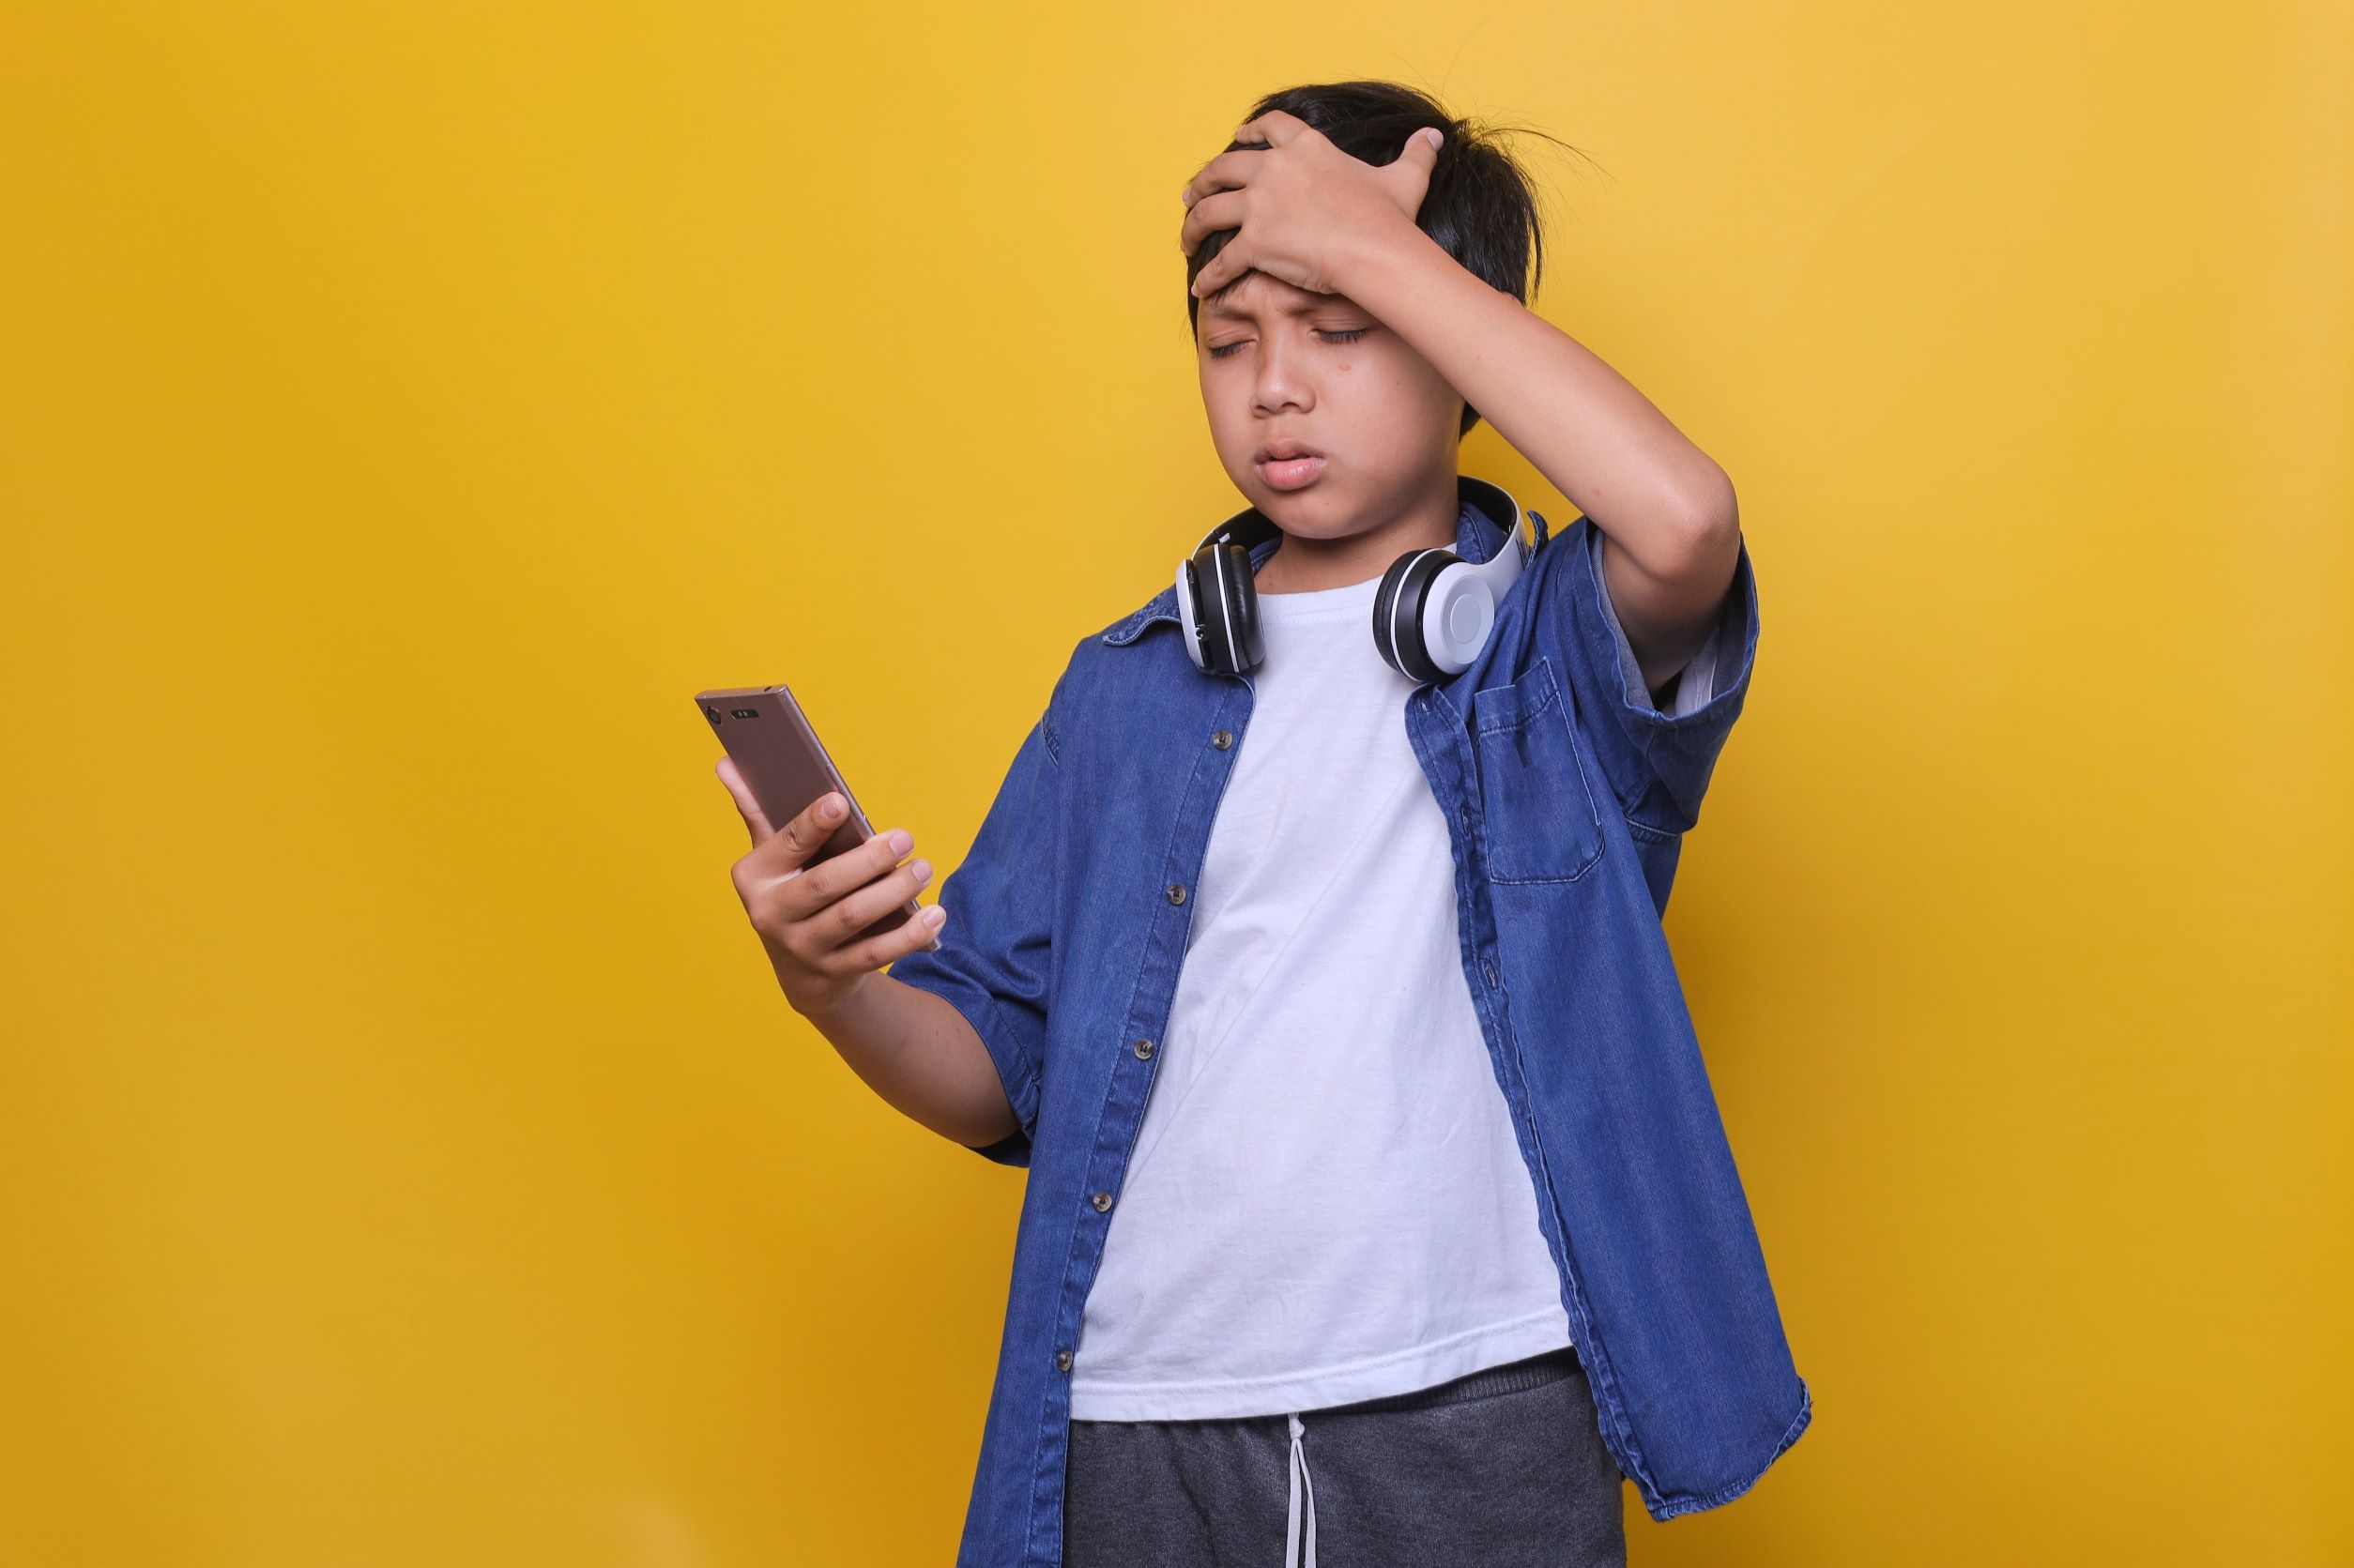 Upset young boy looking at smartphone